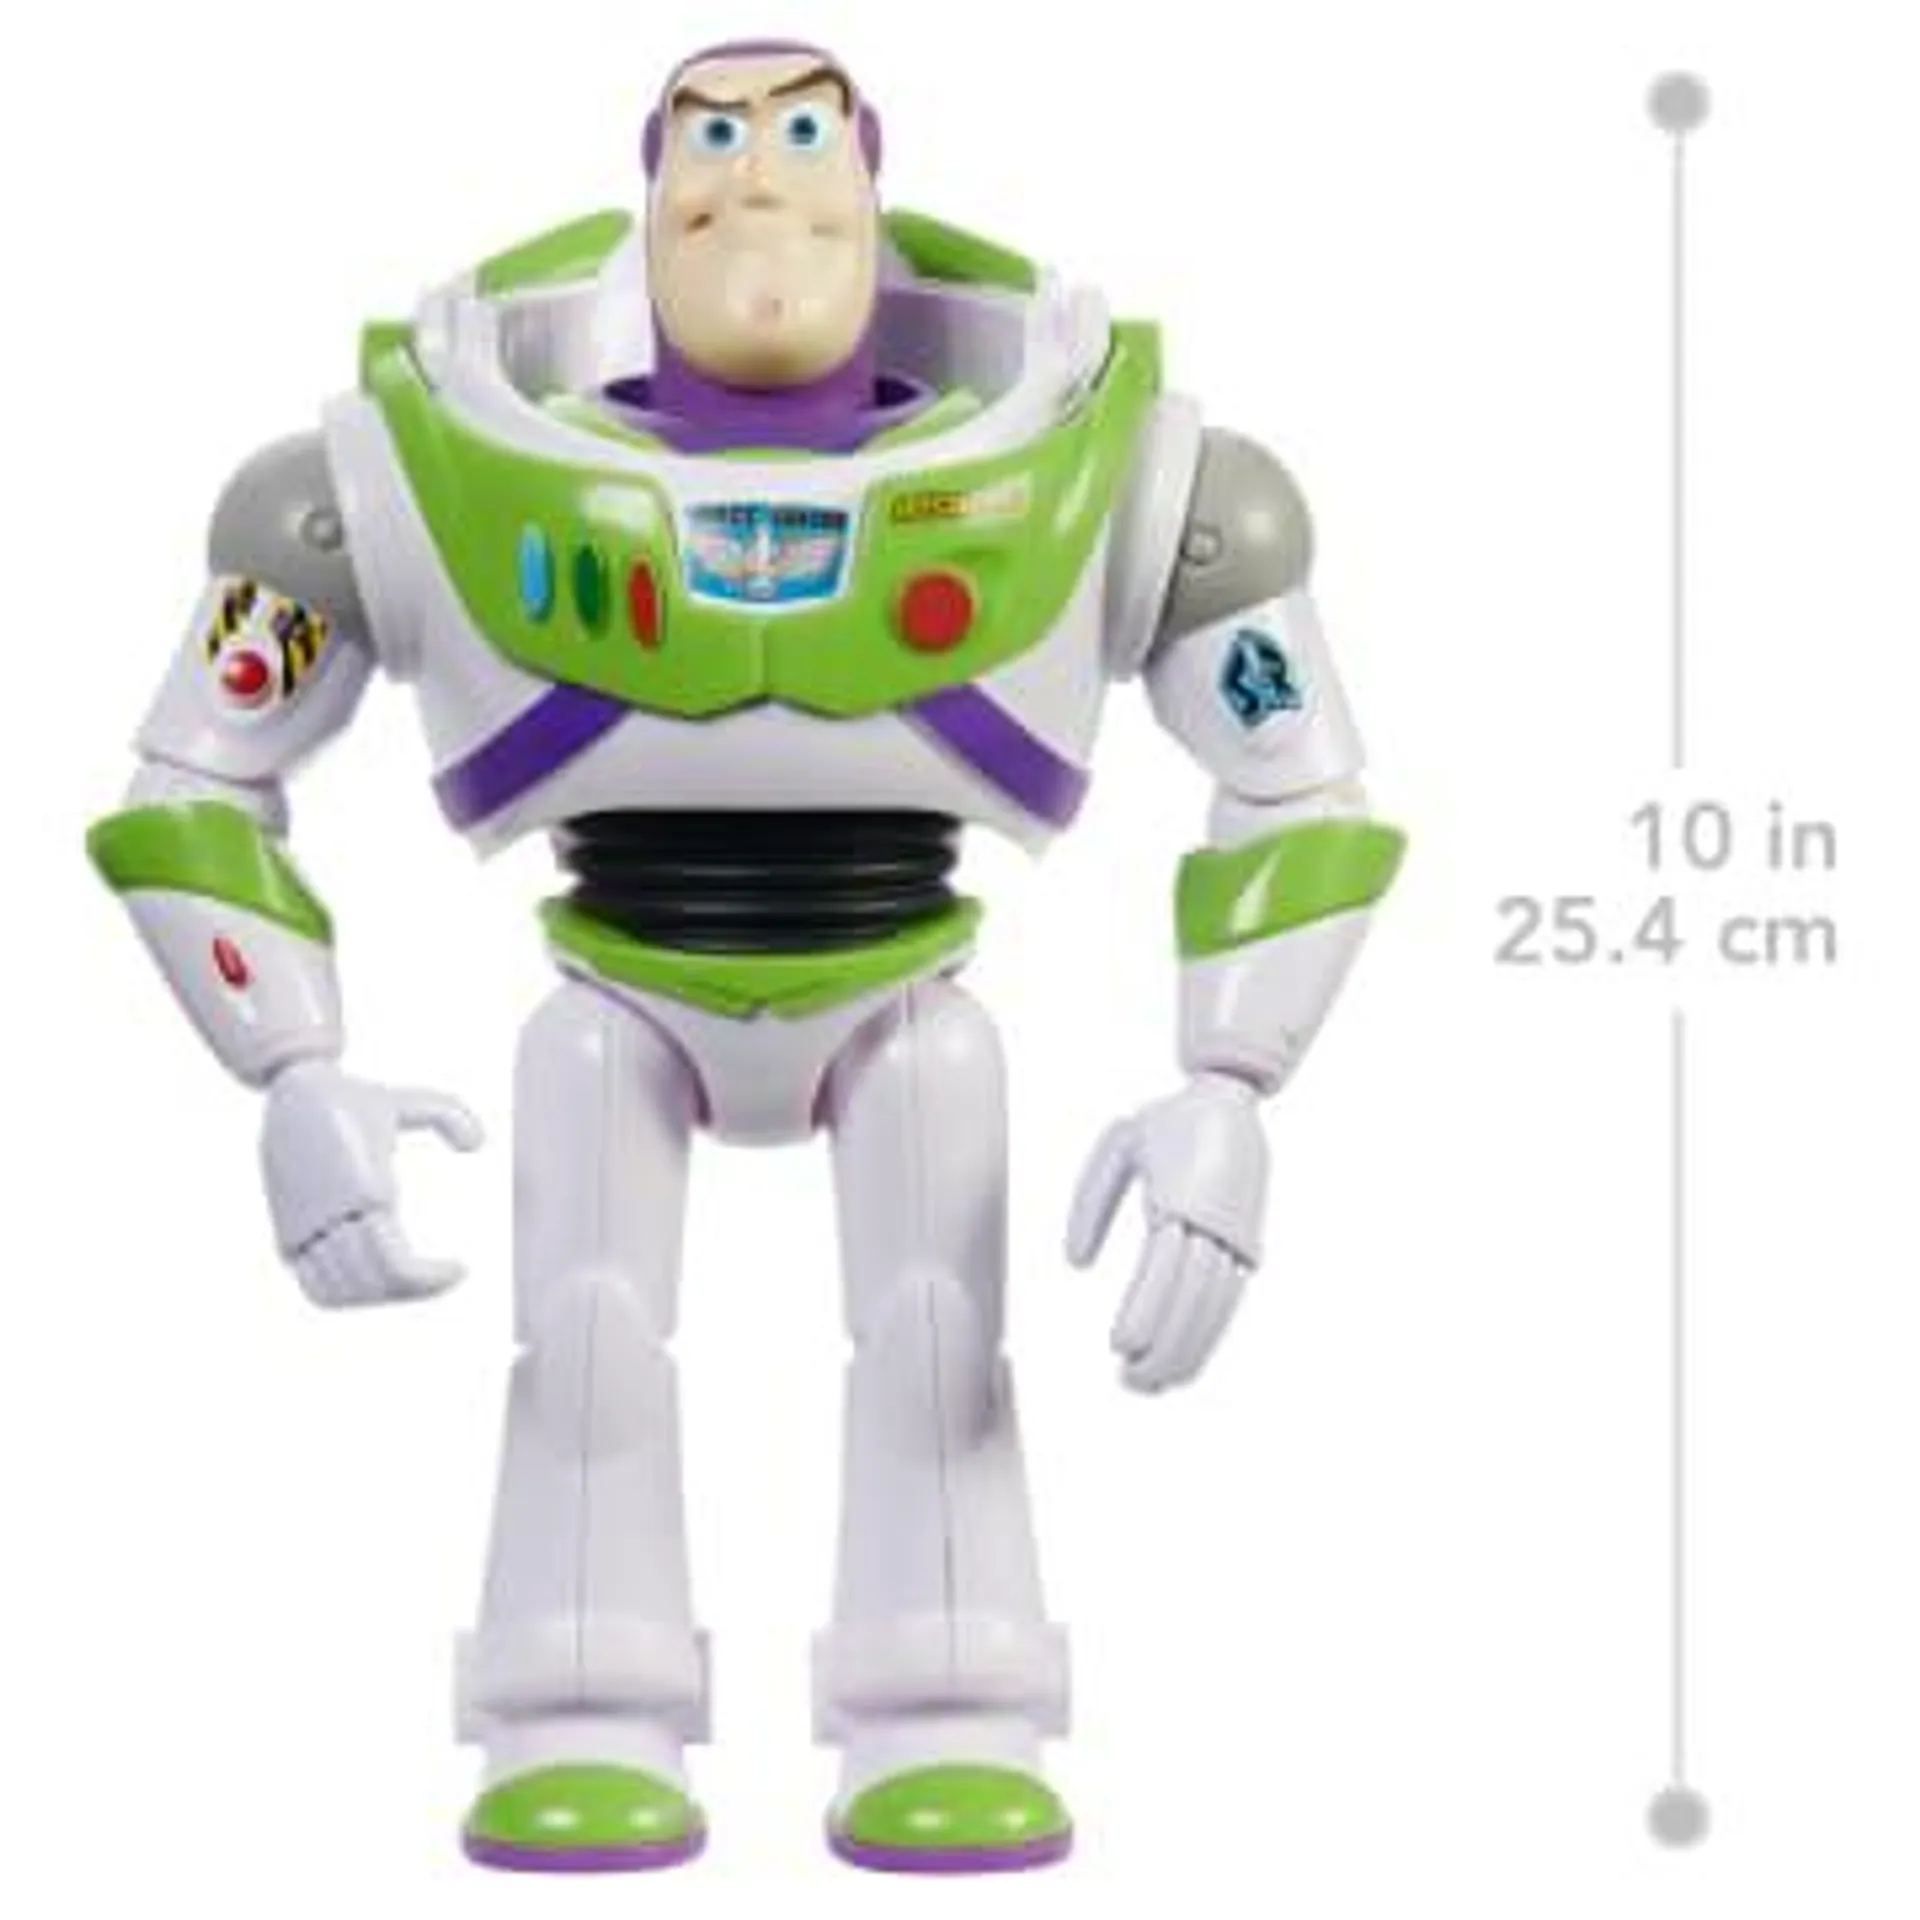 Disney Pixar Toy Story Large Buzz Lightyear Action Figure, Collectible Toy in 12-inch Scale